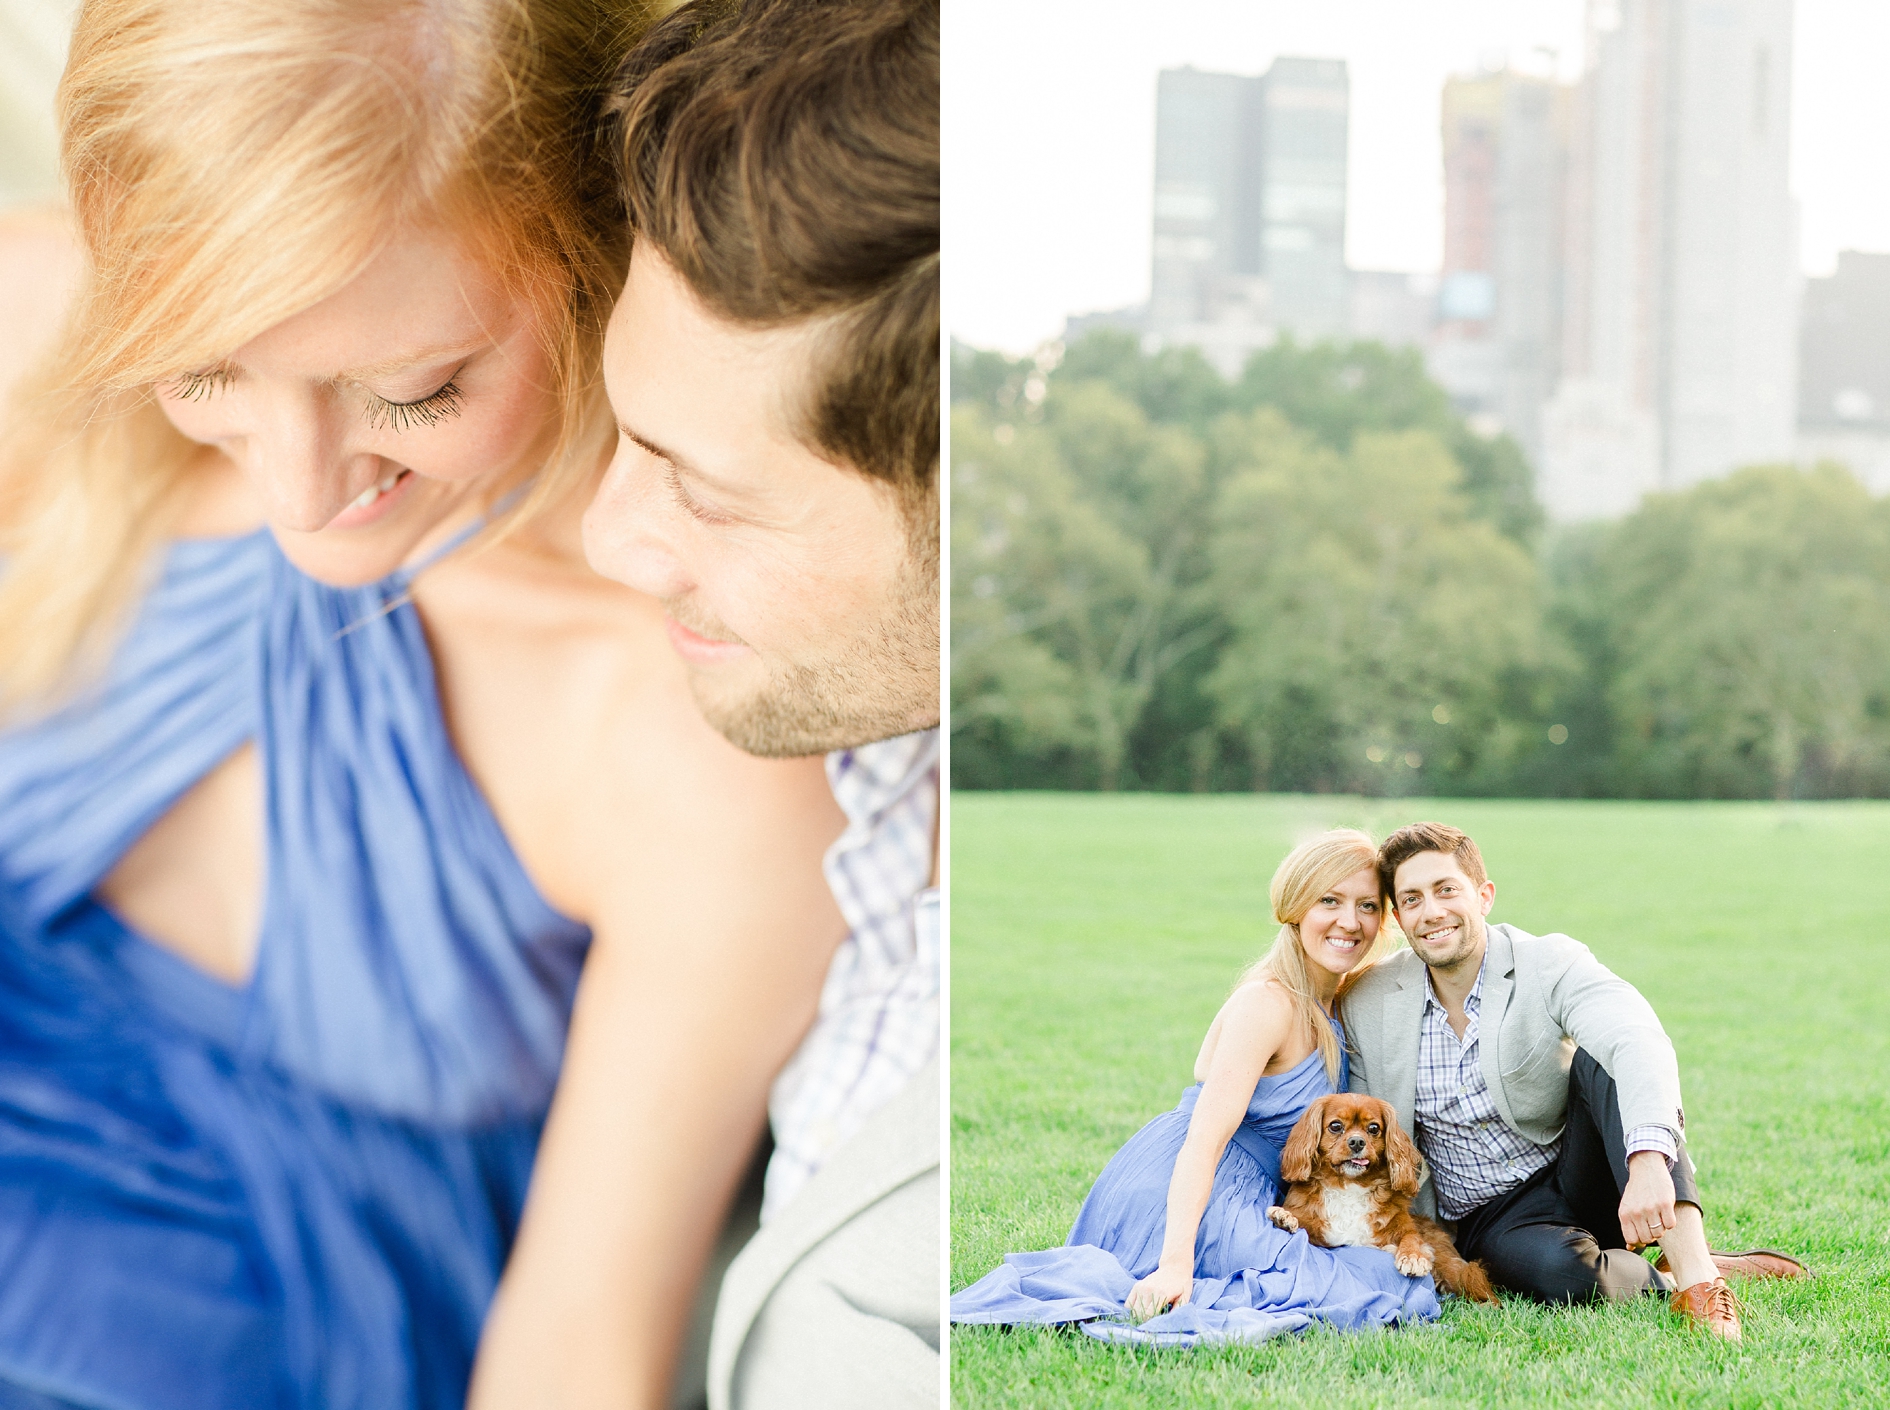 Central Park Engagement | Jenna and Chad | © Ailyn La Torre Photography 2017